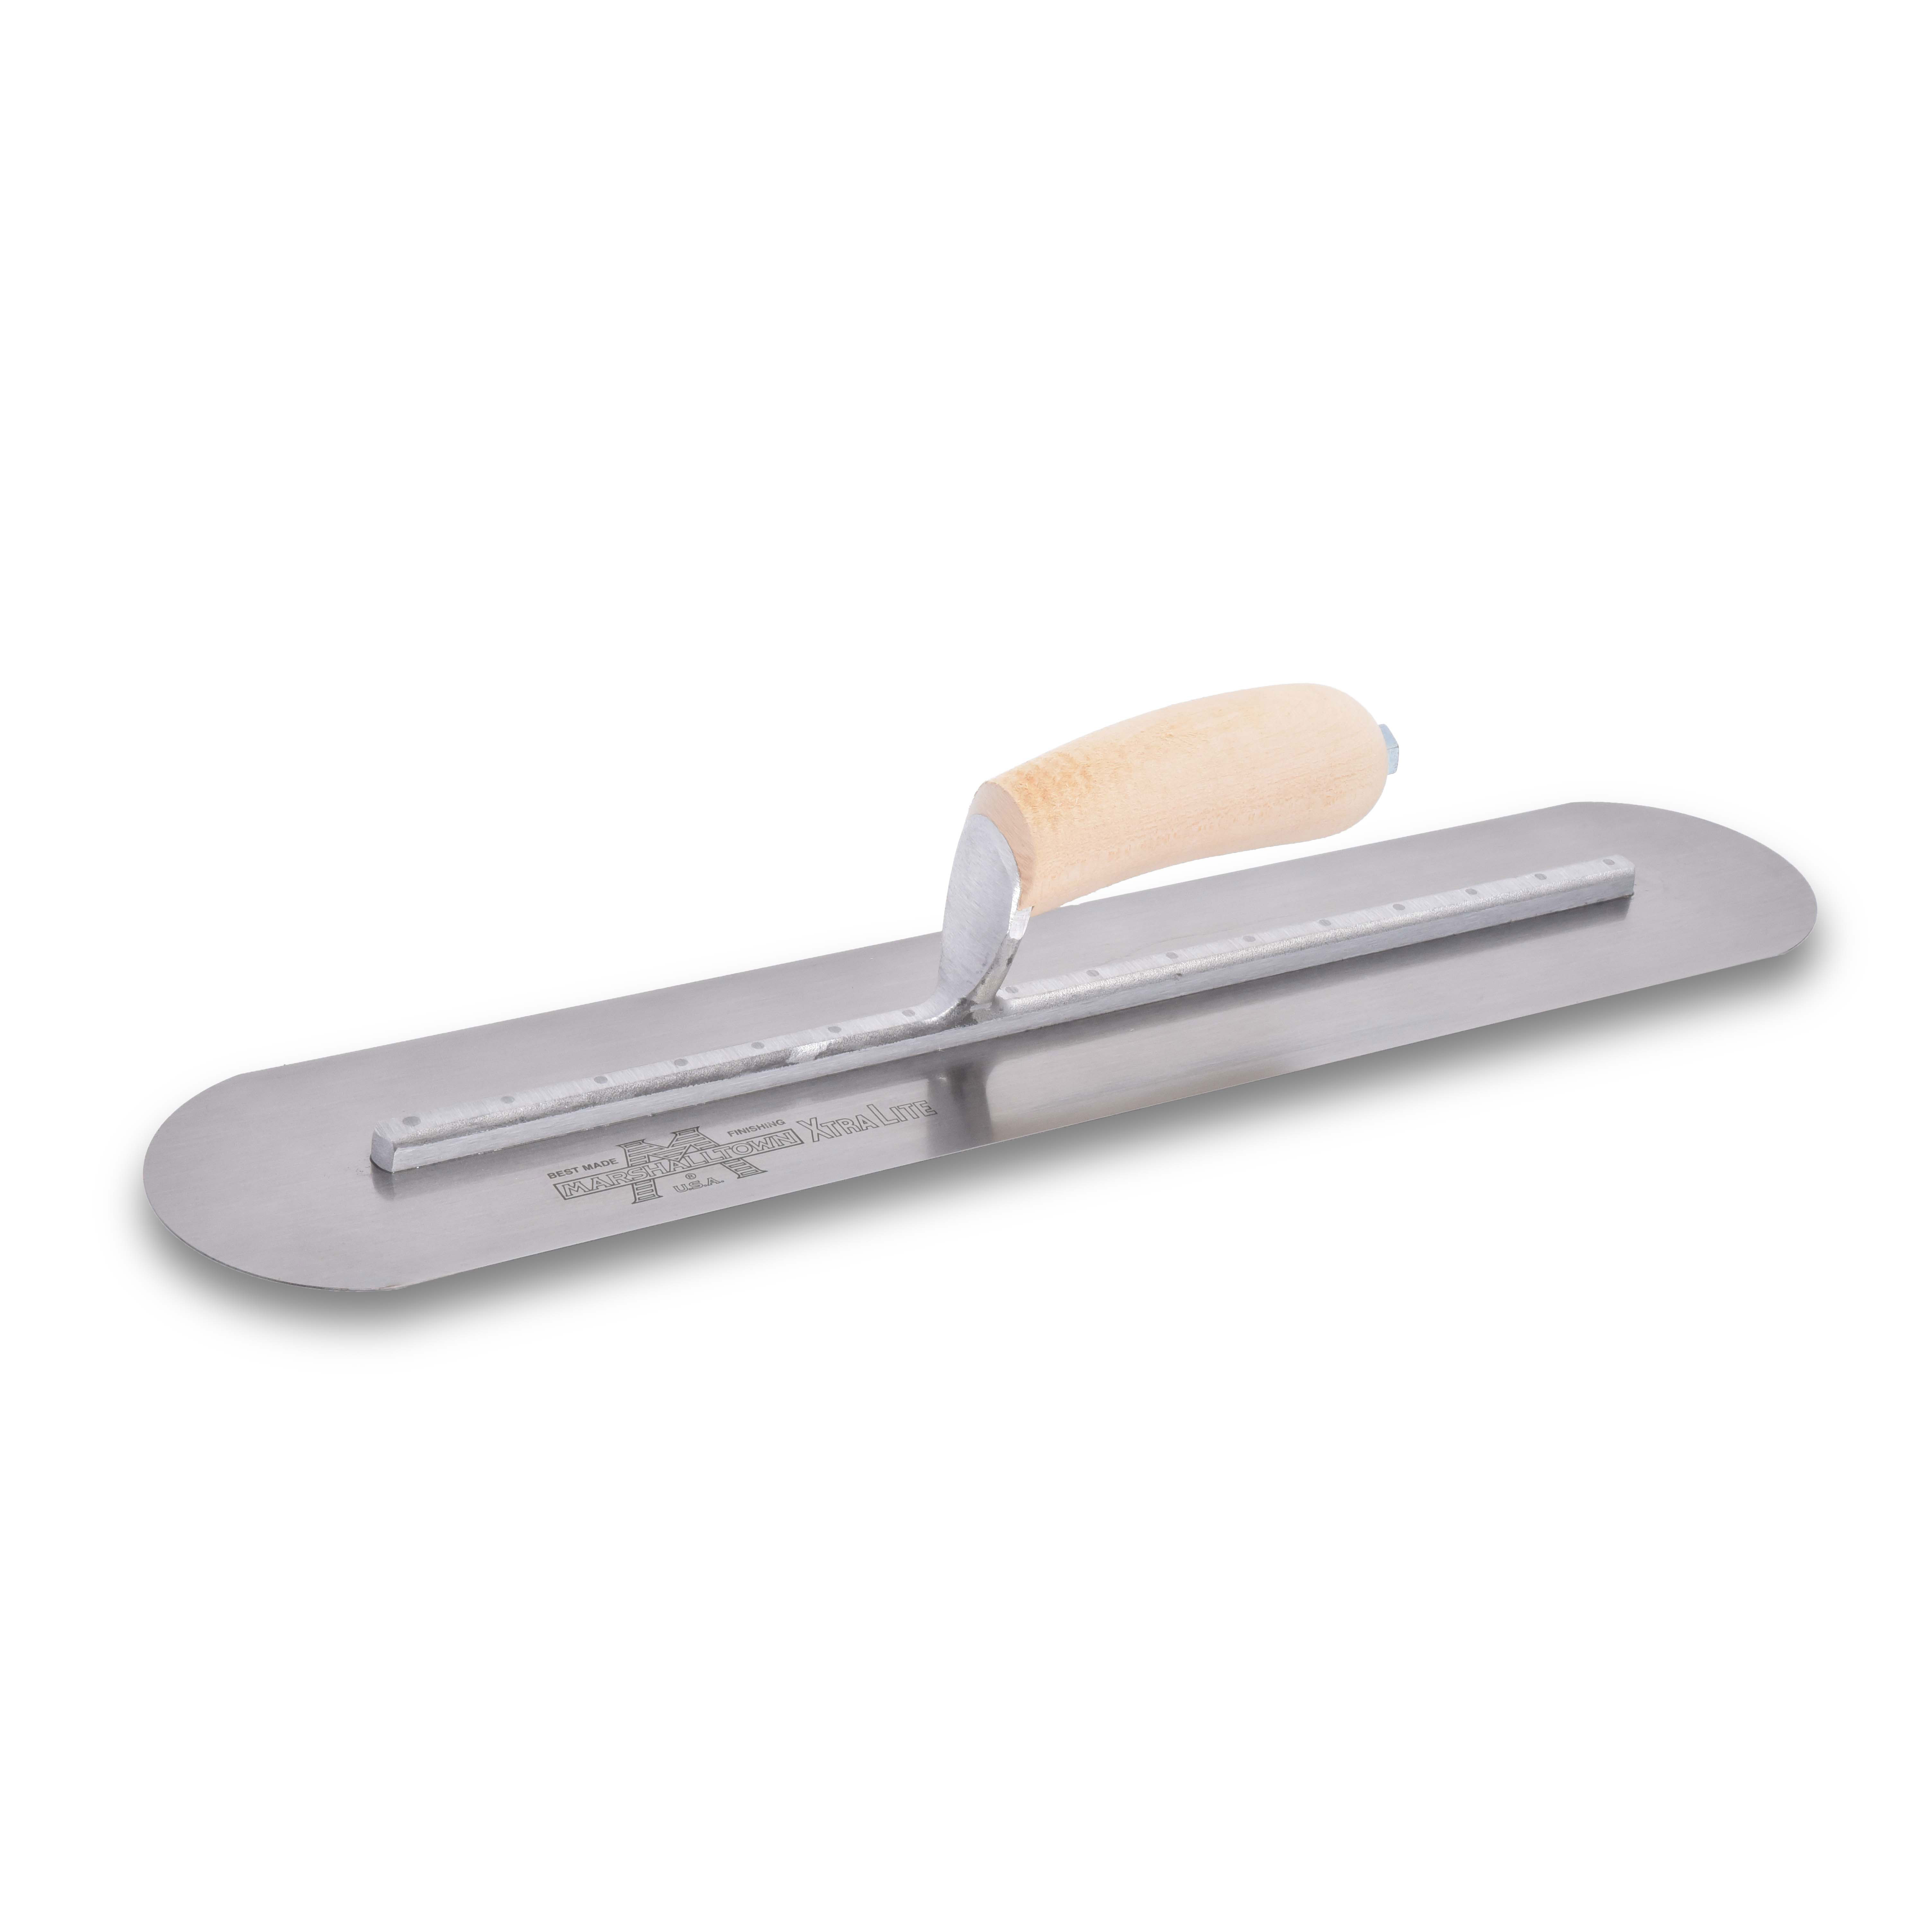 MXS20FR Marshalltown - 20in X 4in Finishing Trowel-Round End w/Curved Wood Handle MXS20FR